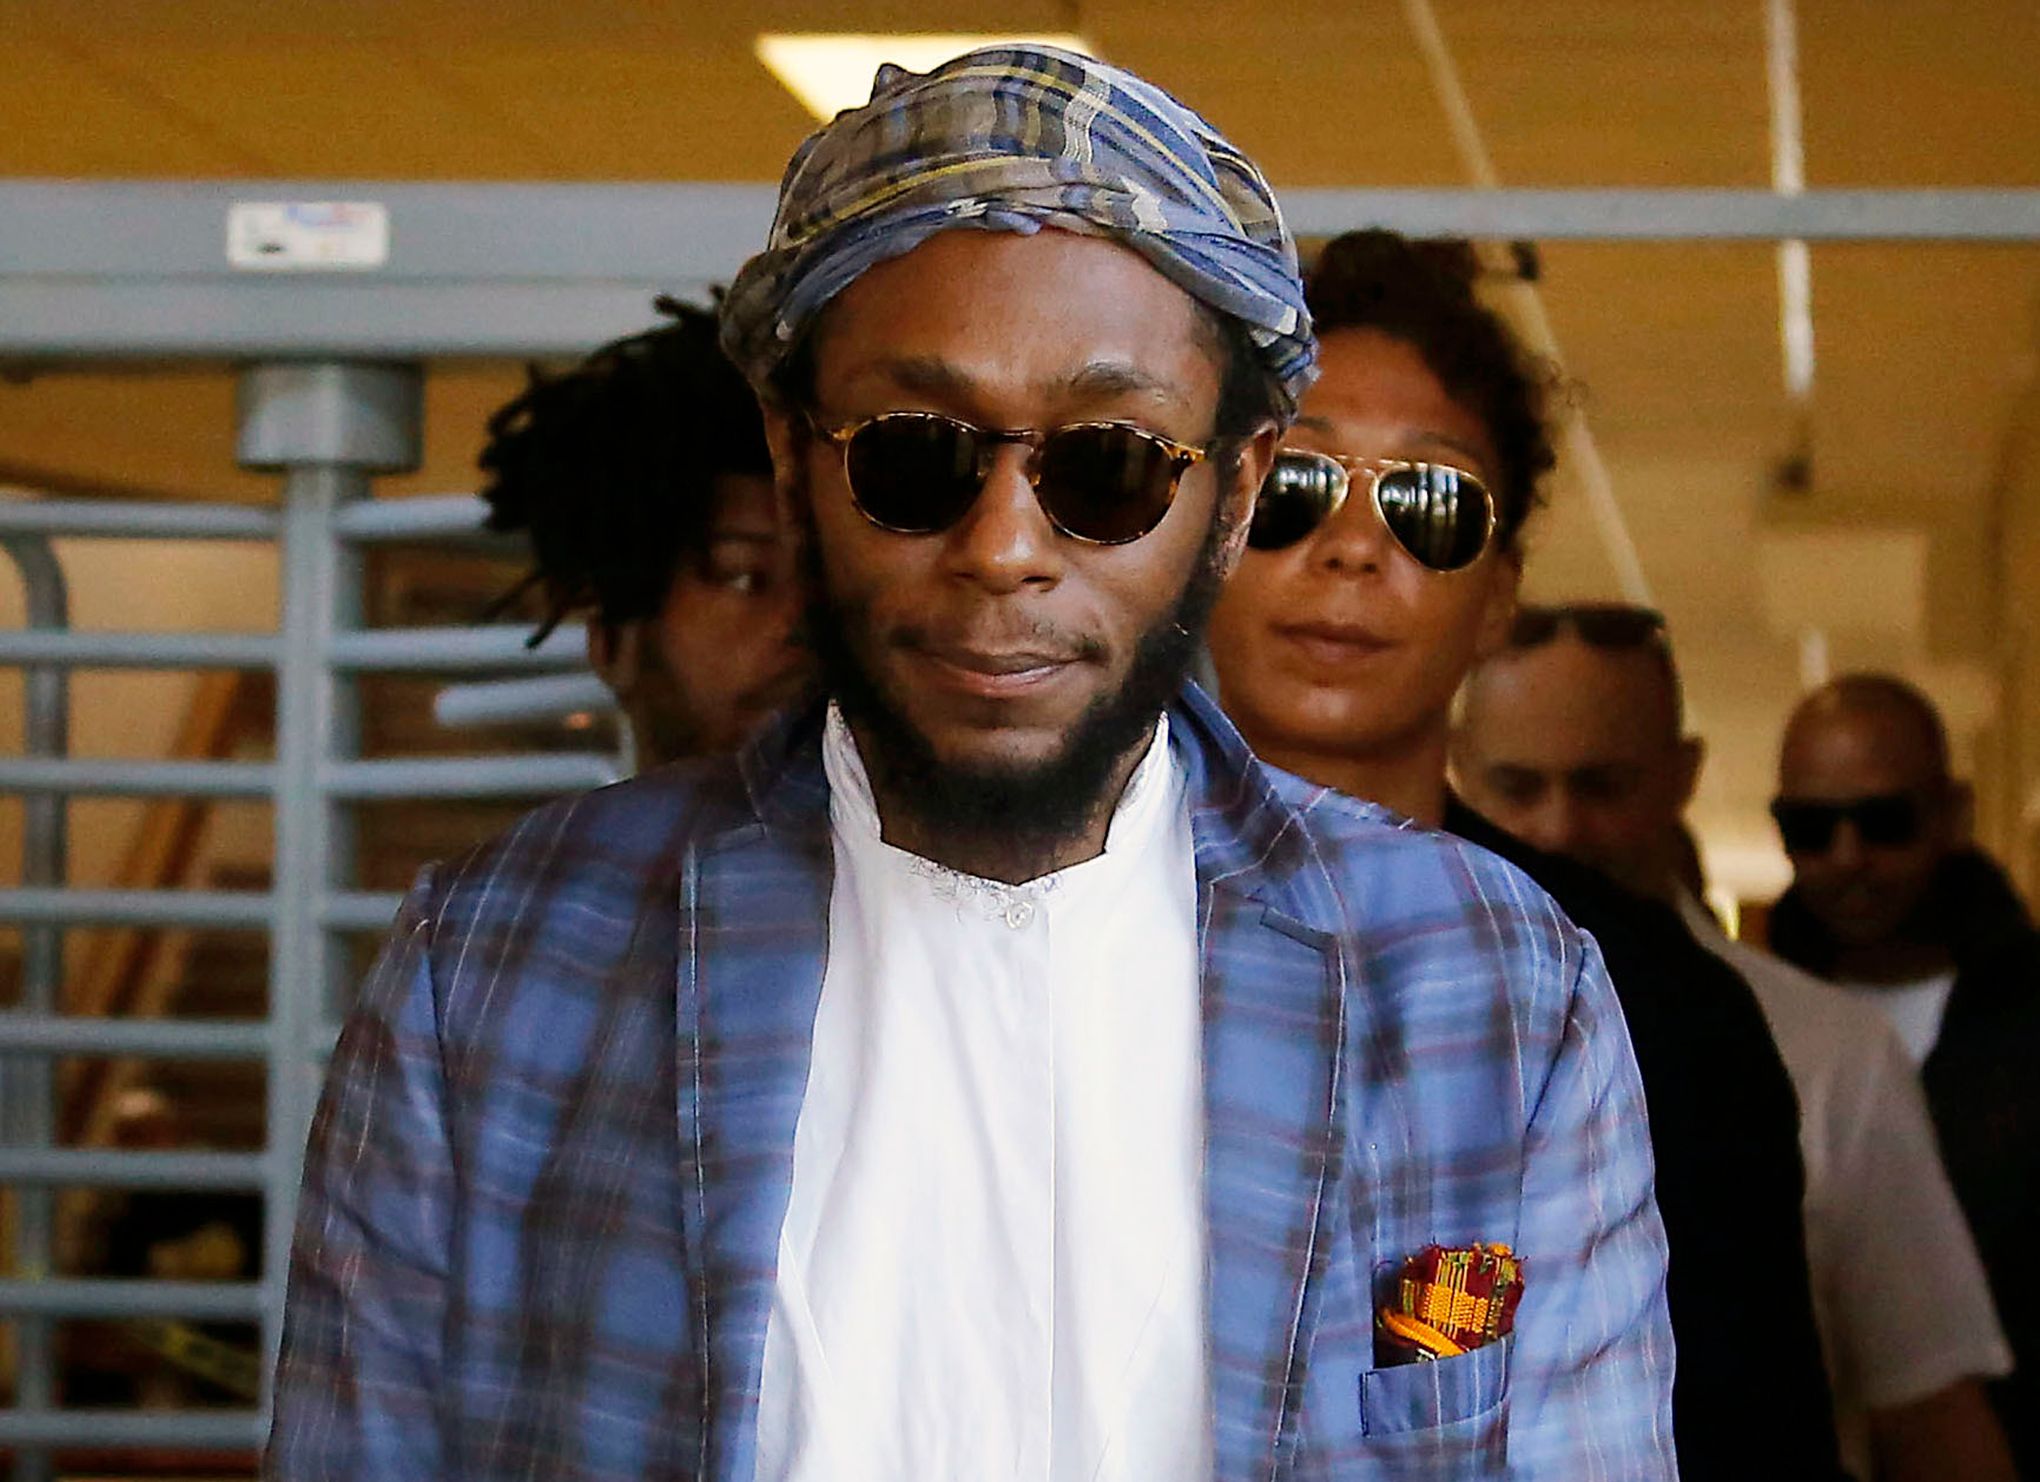 Dept: Mos Def 'unreservedly apologised' to govt over passport row